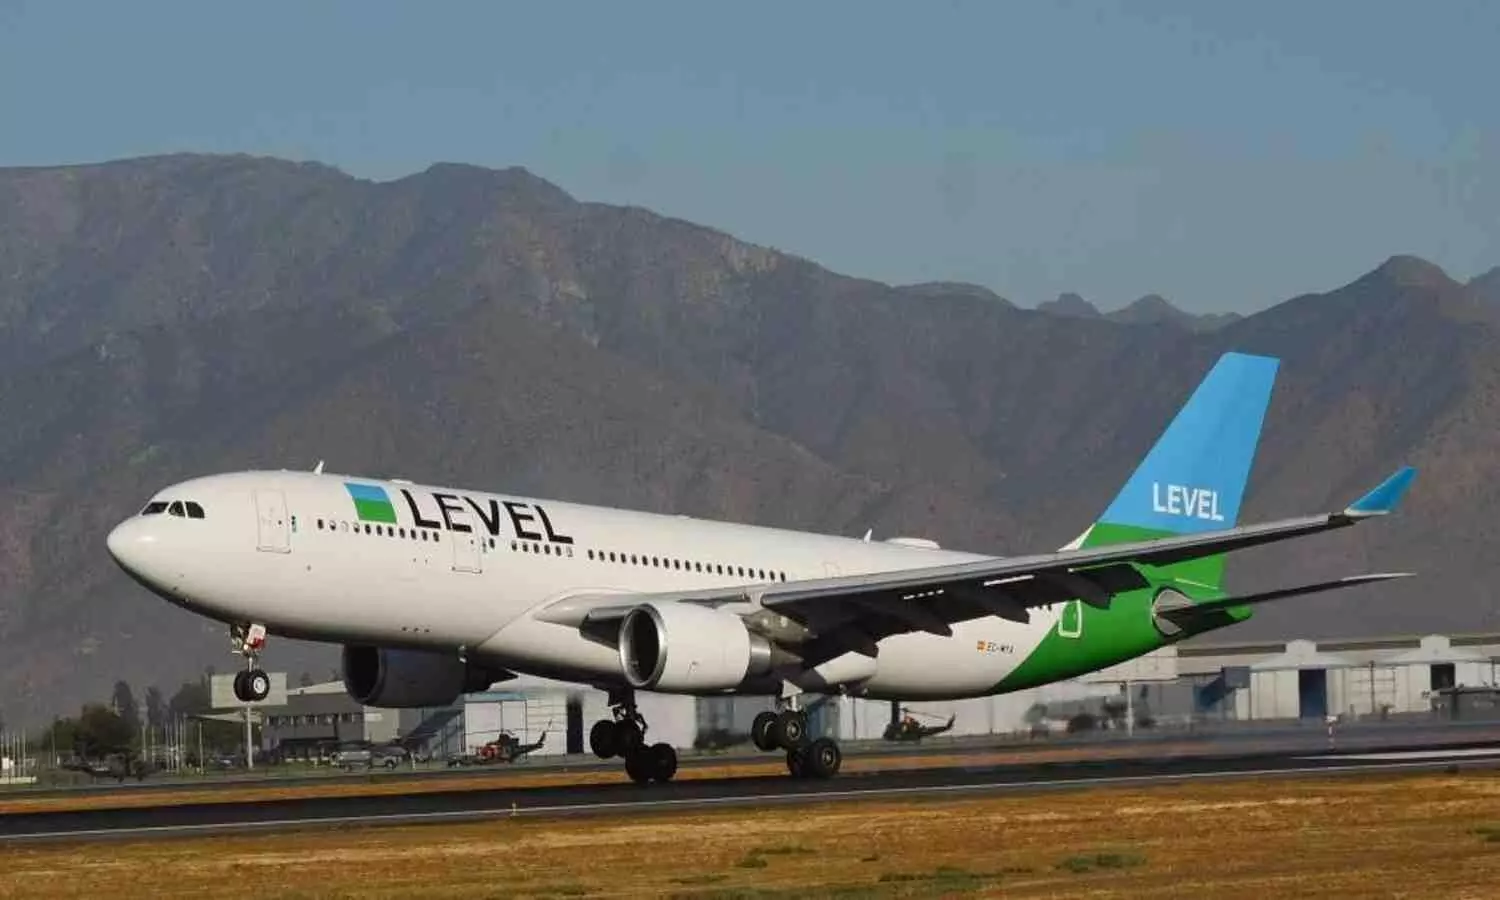 IAG Cargo restarts service between Barcelona and Chile